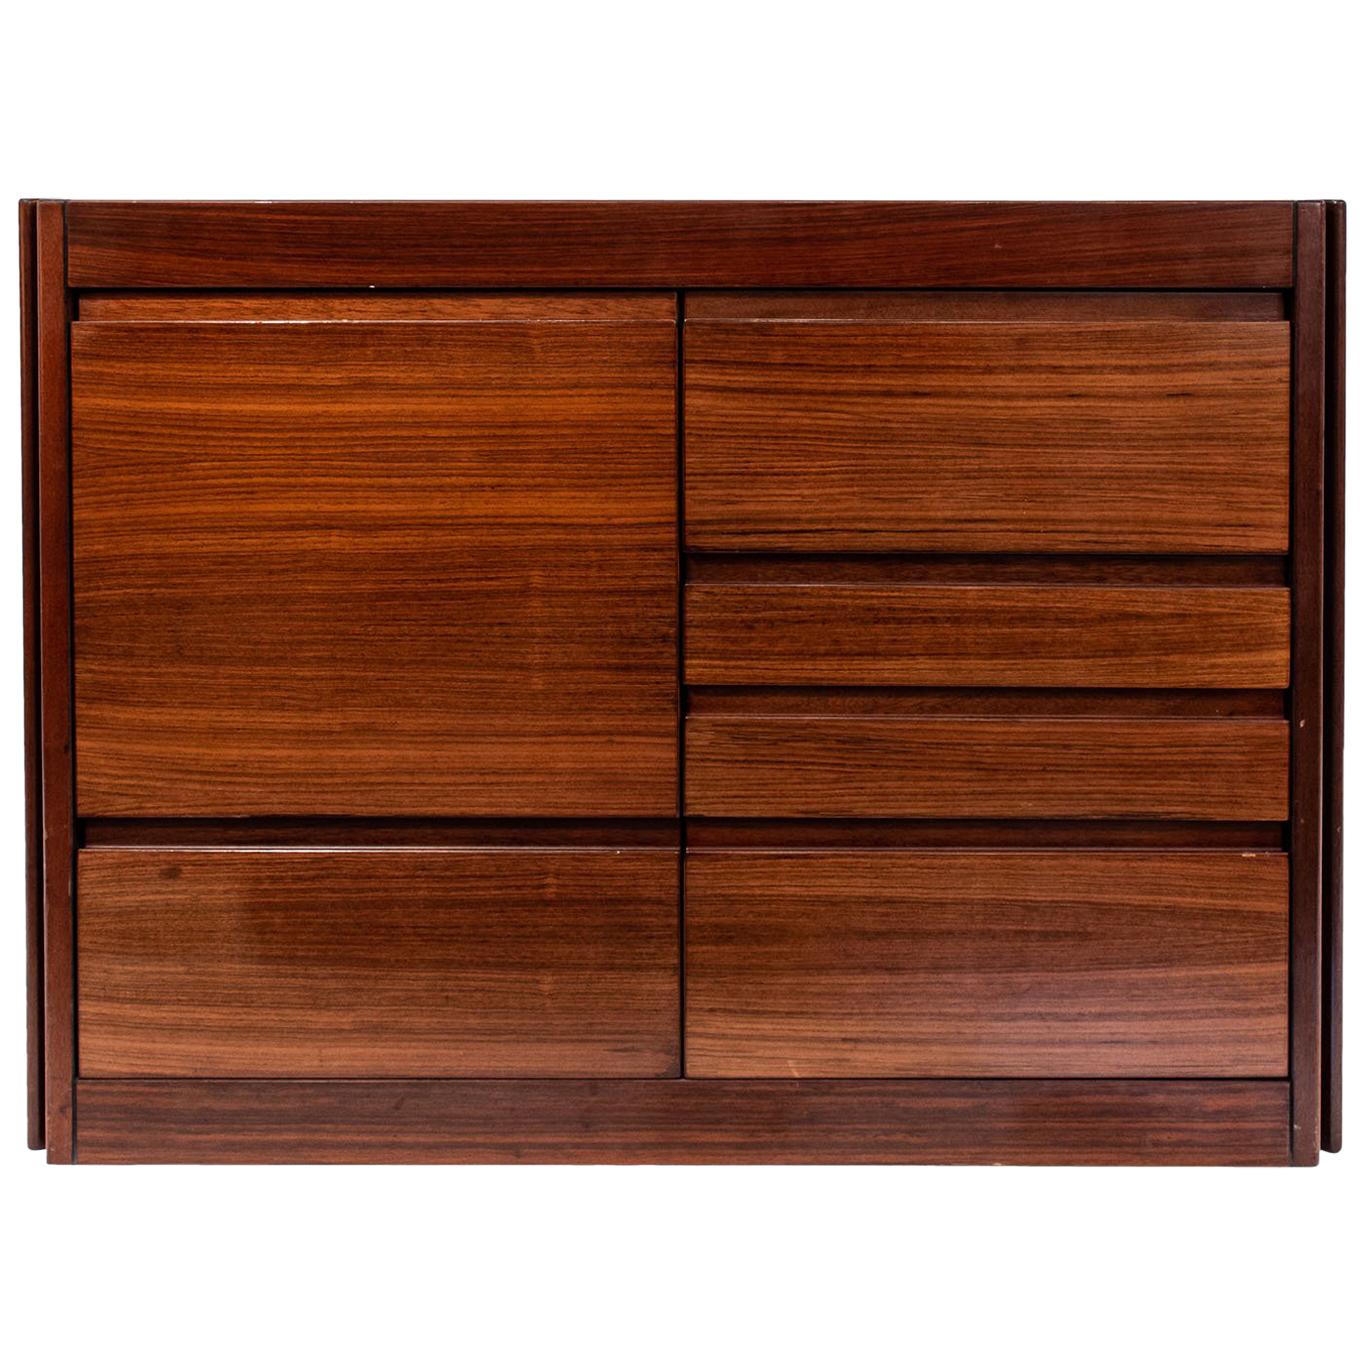 Angelo Mangiarotti, Sideboard, Wood and Marble, France, circa 1970